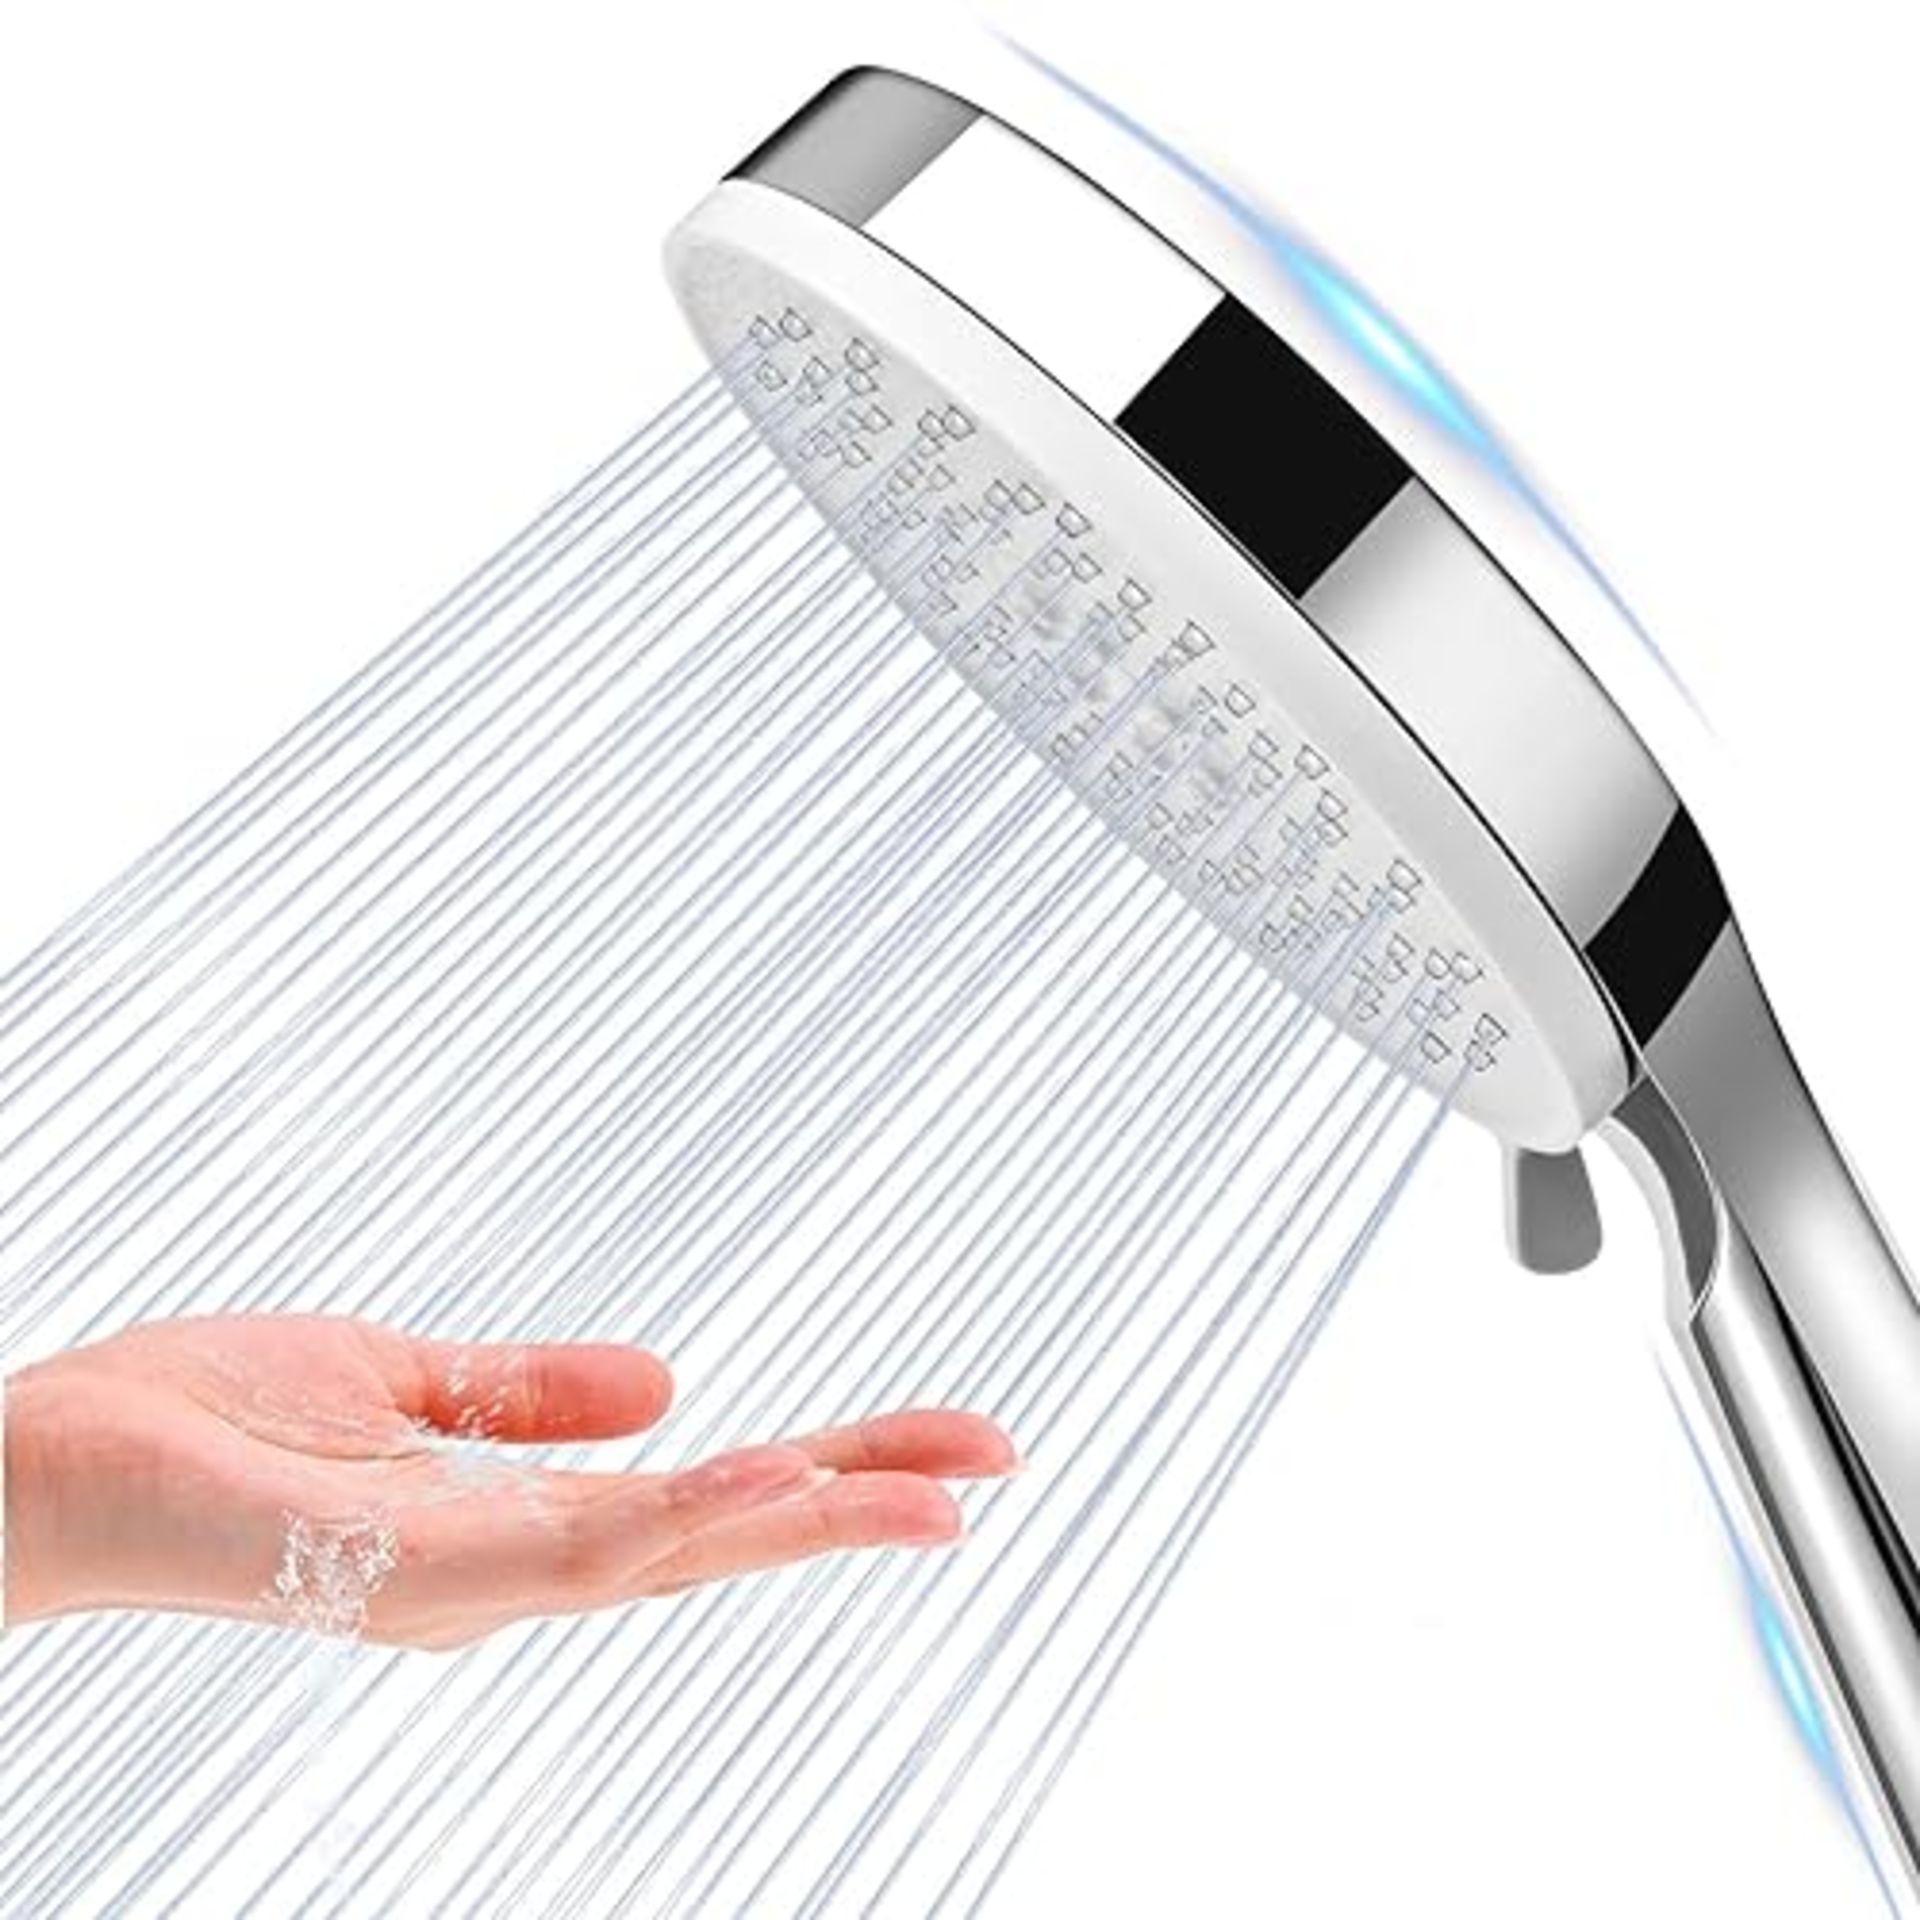 YiWeel Shower Head with Silicone Outlet,Silk Rain Design Handheld Shower Head 3 Mode